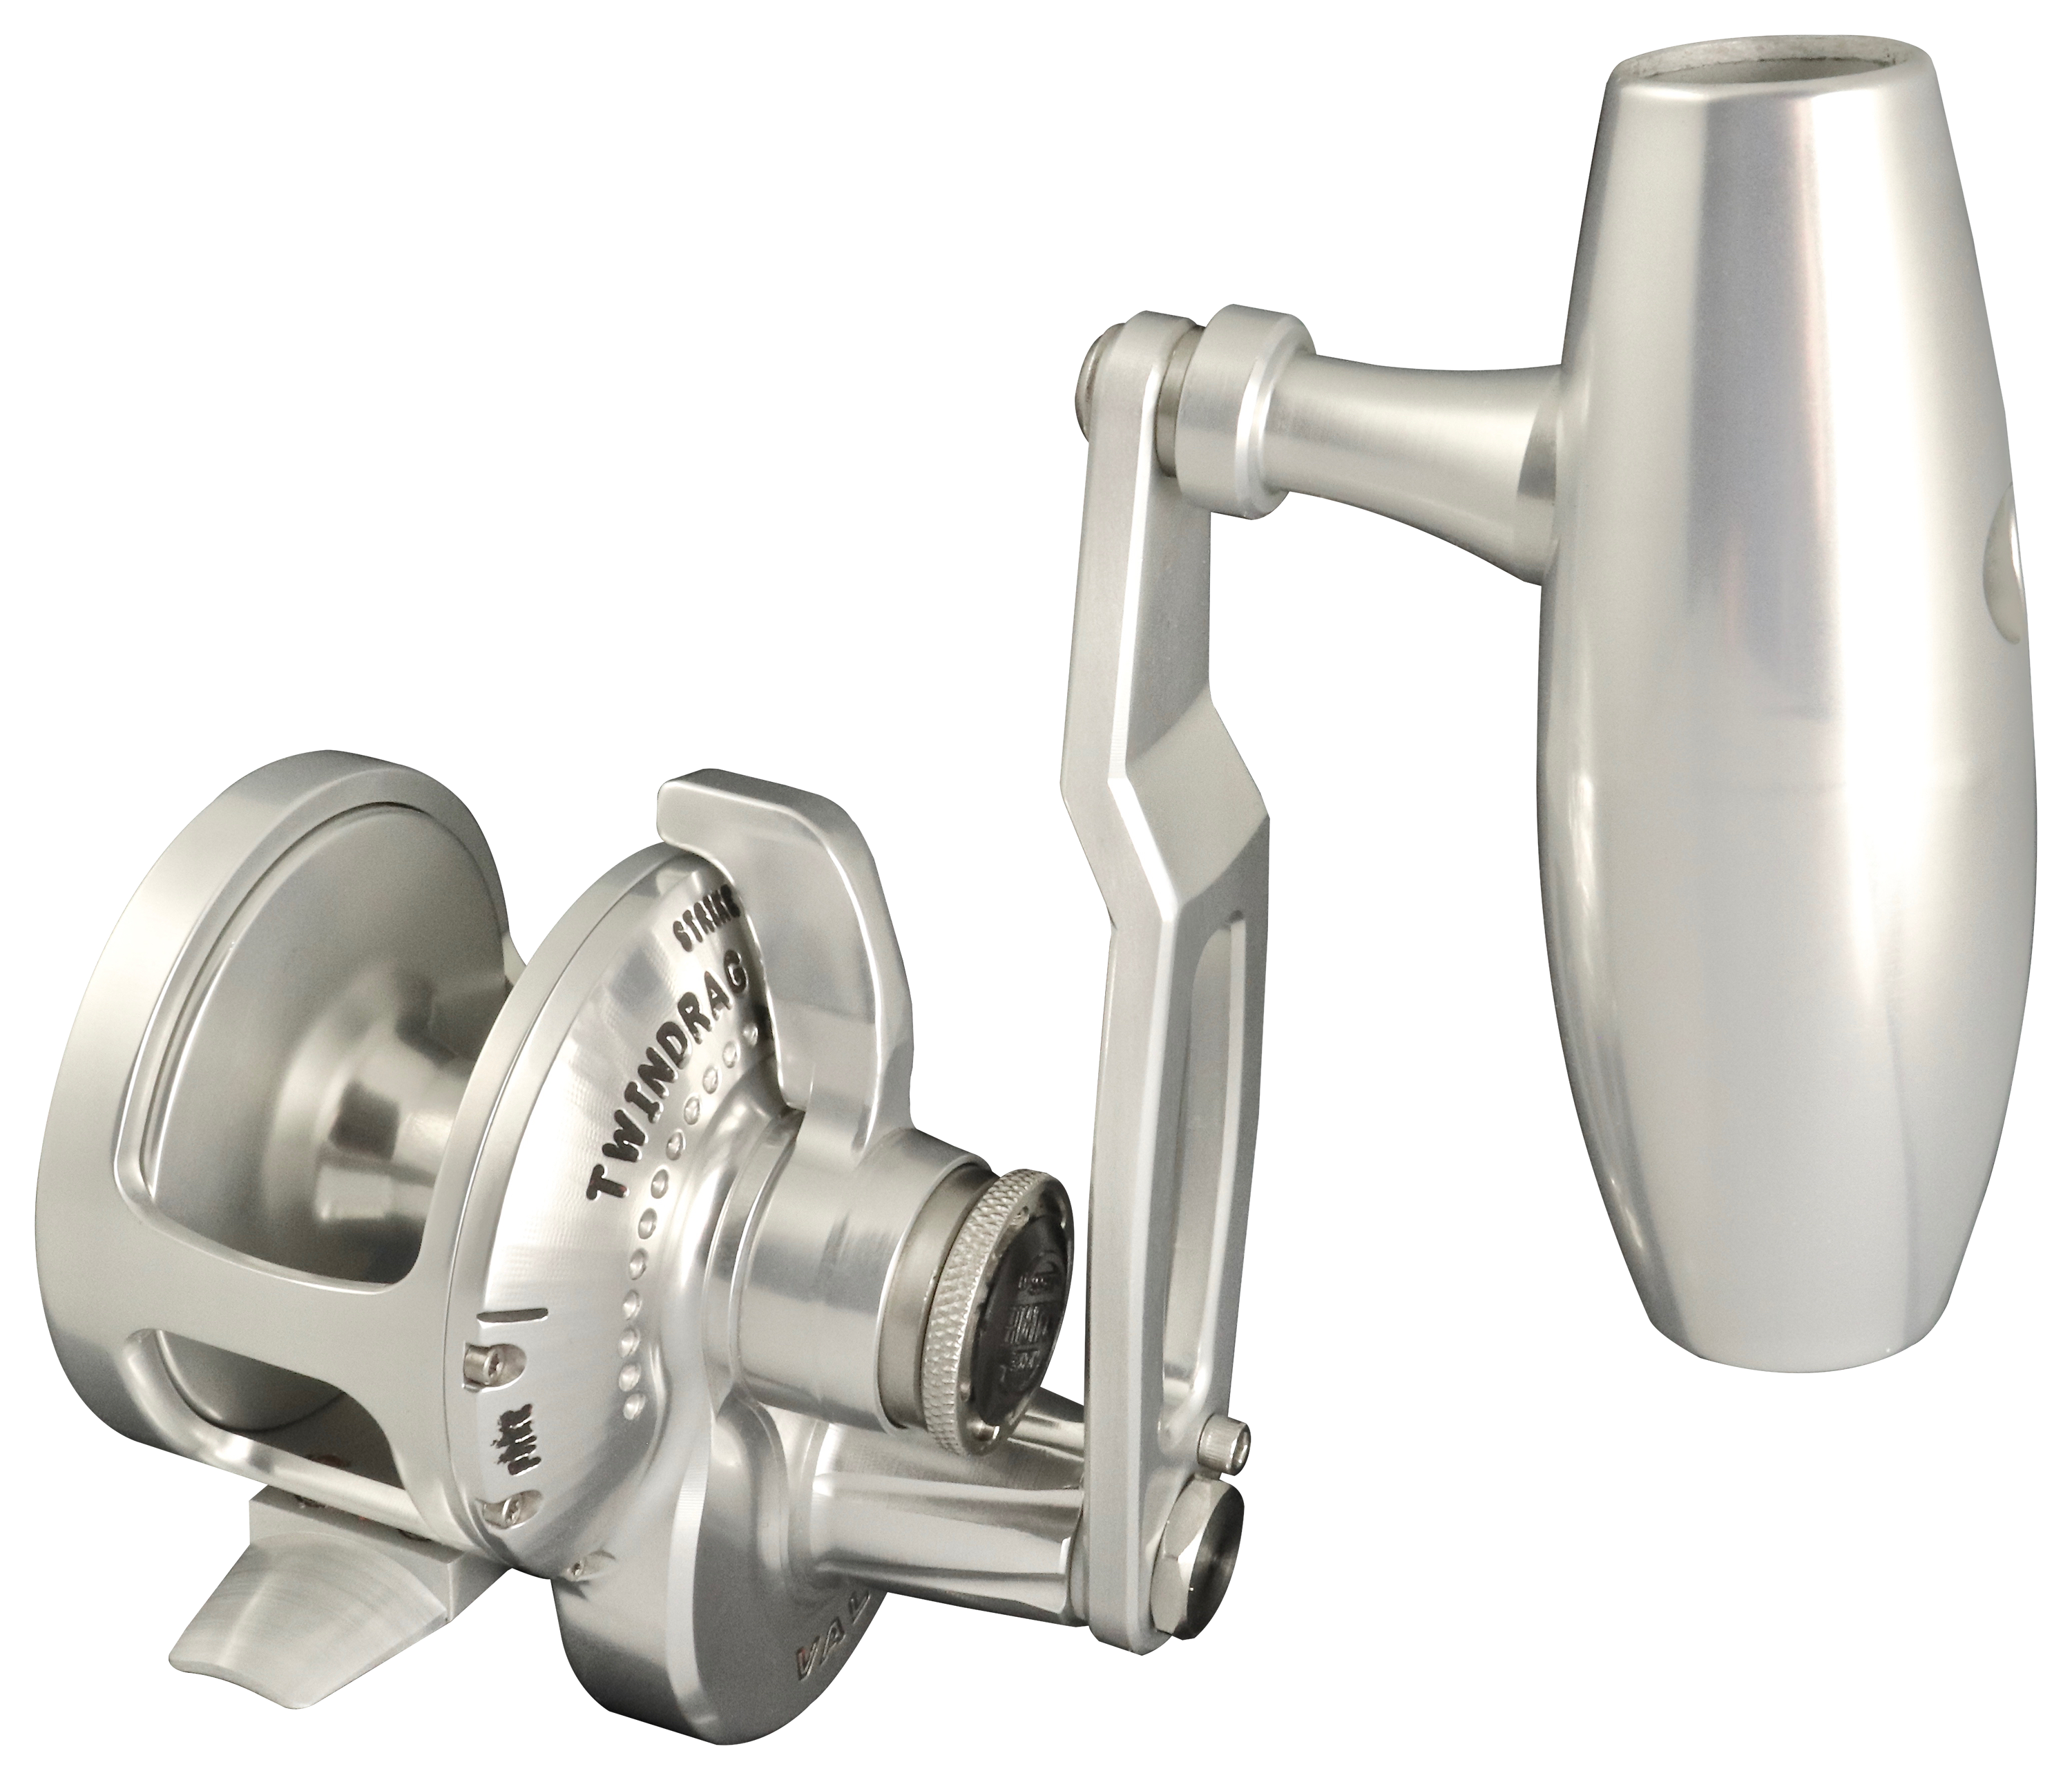 Accurate Valiant Slow Pitch Conventional Reels BV2-300-SPJ